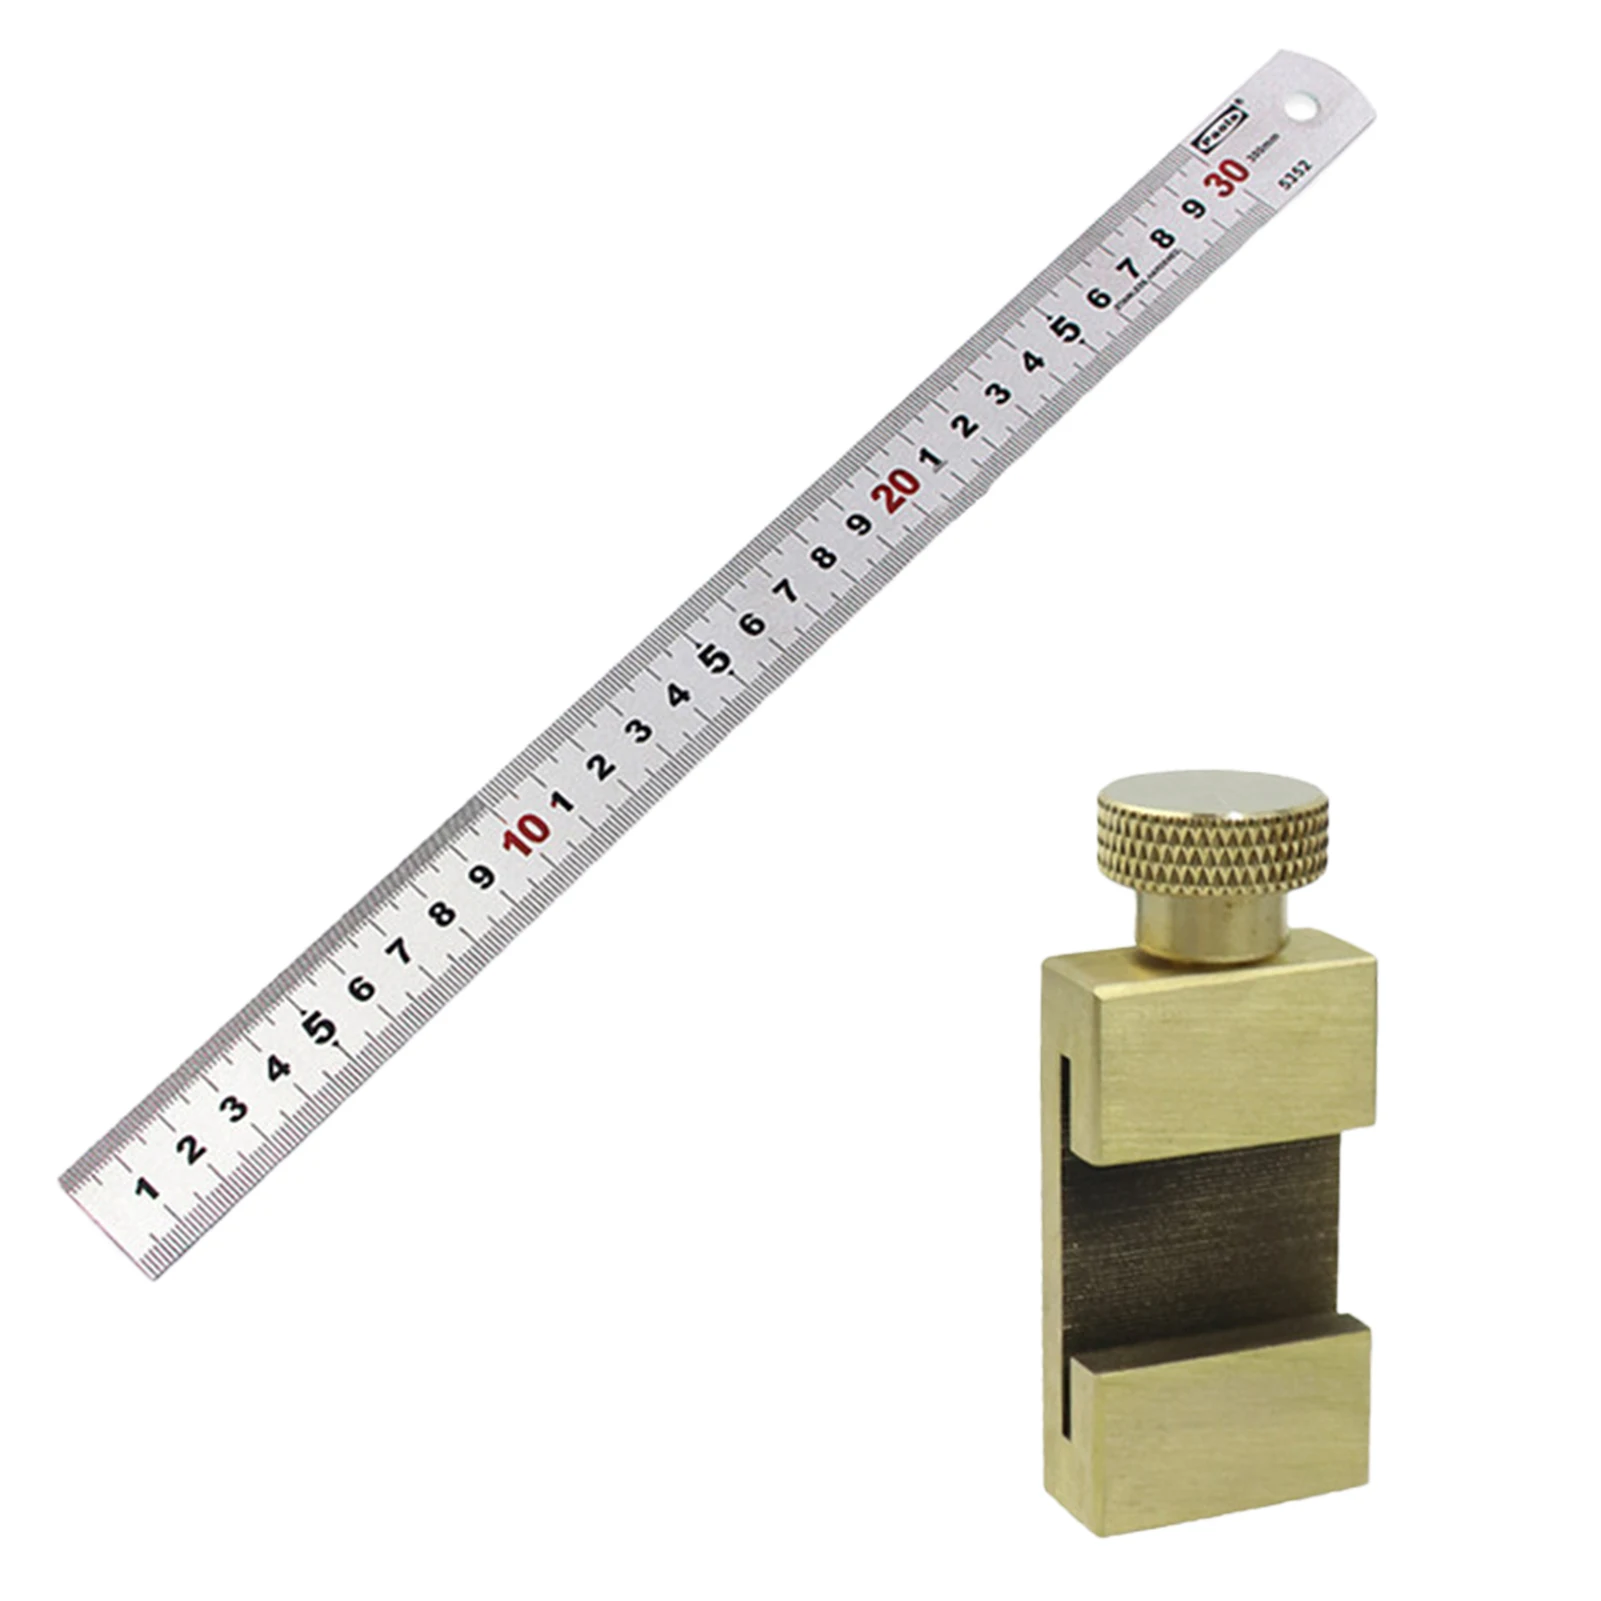 

Stainless Steel Ruler Measuring Tool Brass Stop Drawings School Office Double Scale DIY Accurate Precise Crafts Woodworking